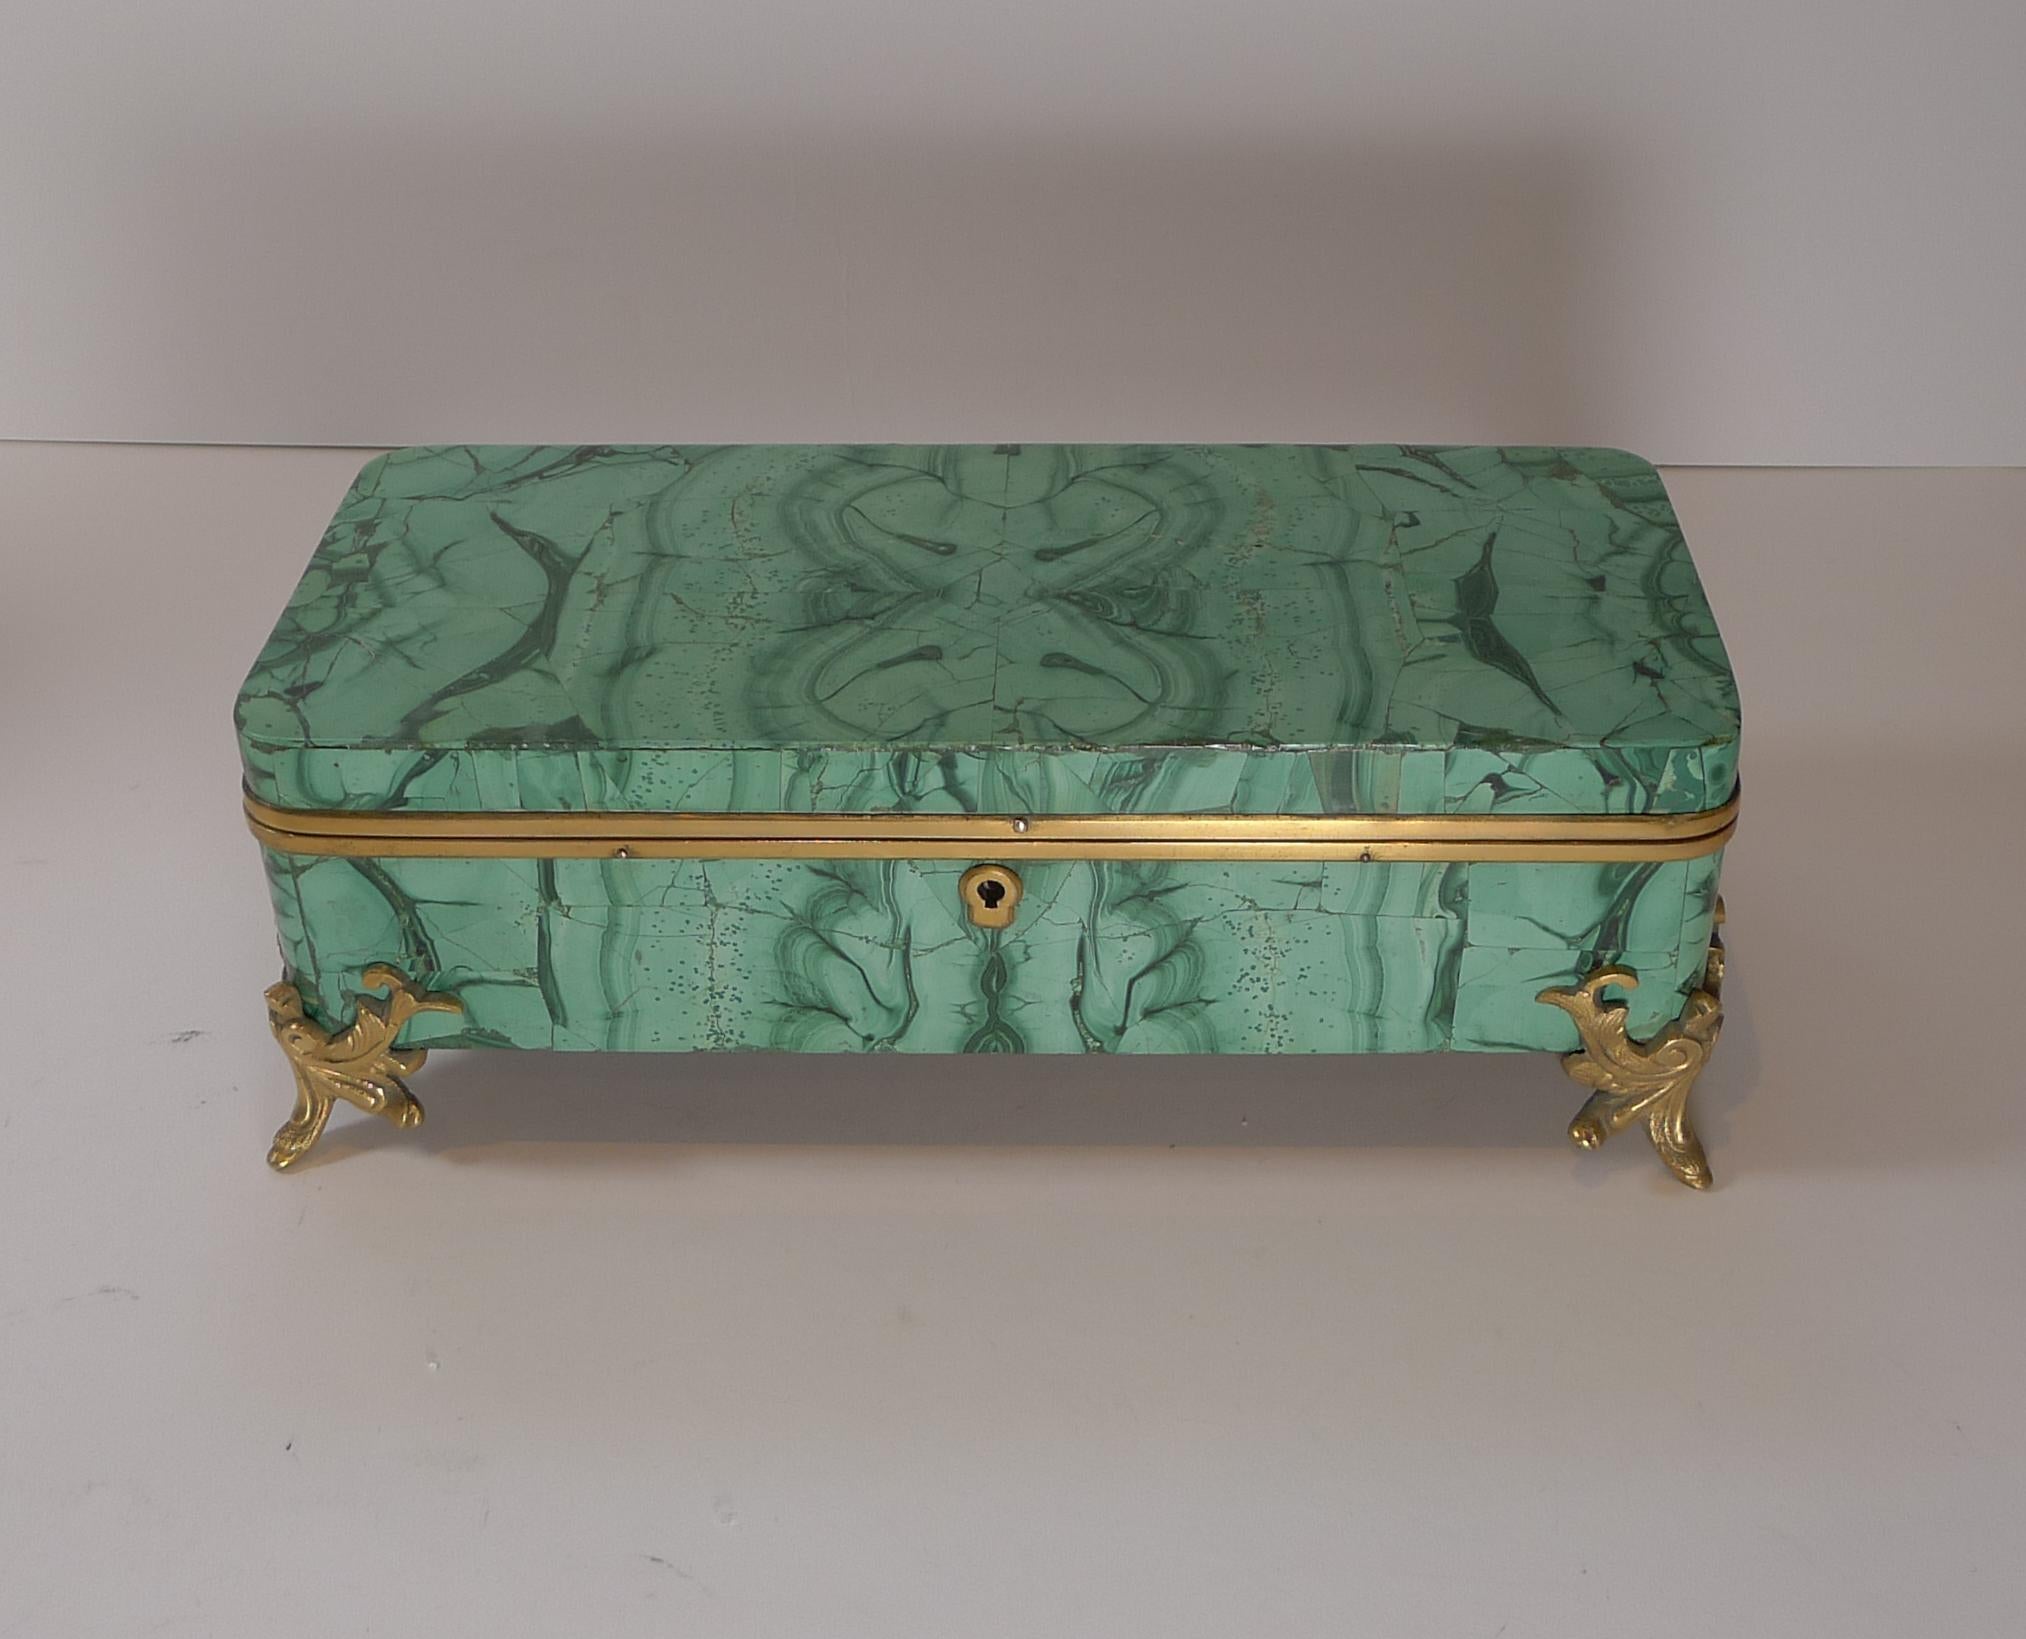 A truly fabulous late nineteenth century jewelry box made from a fine example of malachite, the first image is the most true colour in person.

The Malachite during this era was aggressively mined in the Ural Mountains of Russia so I suspect the